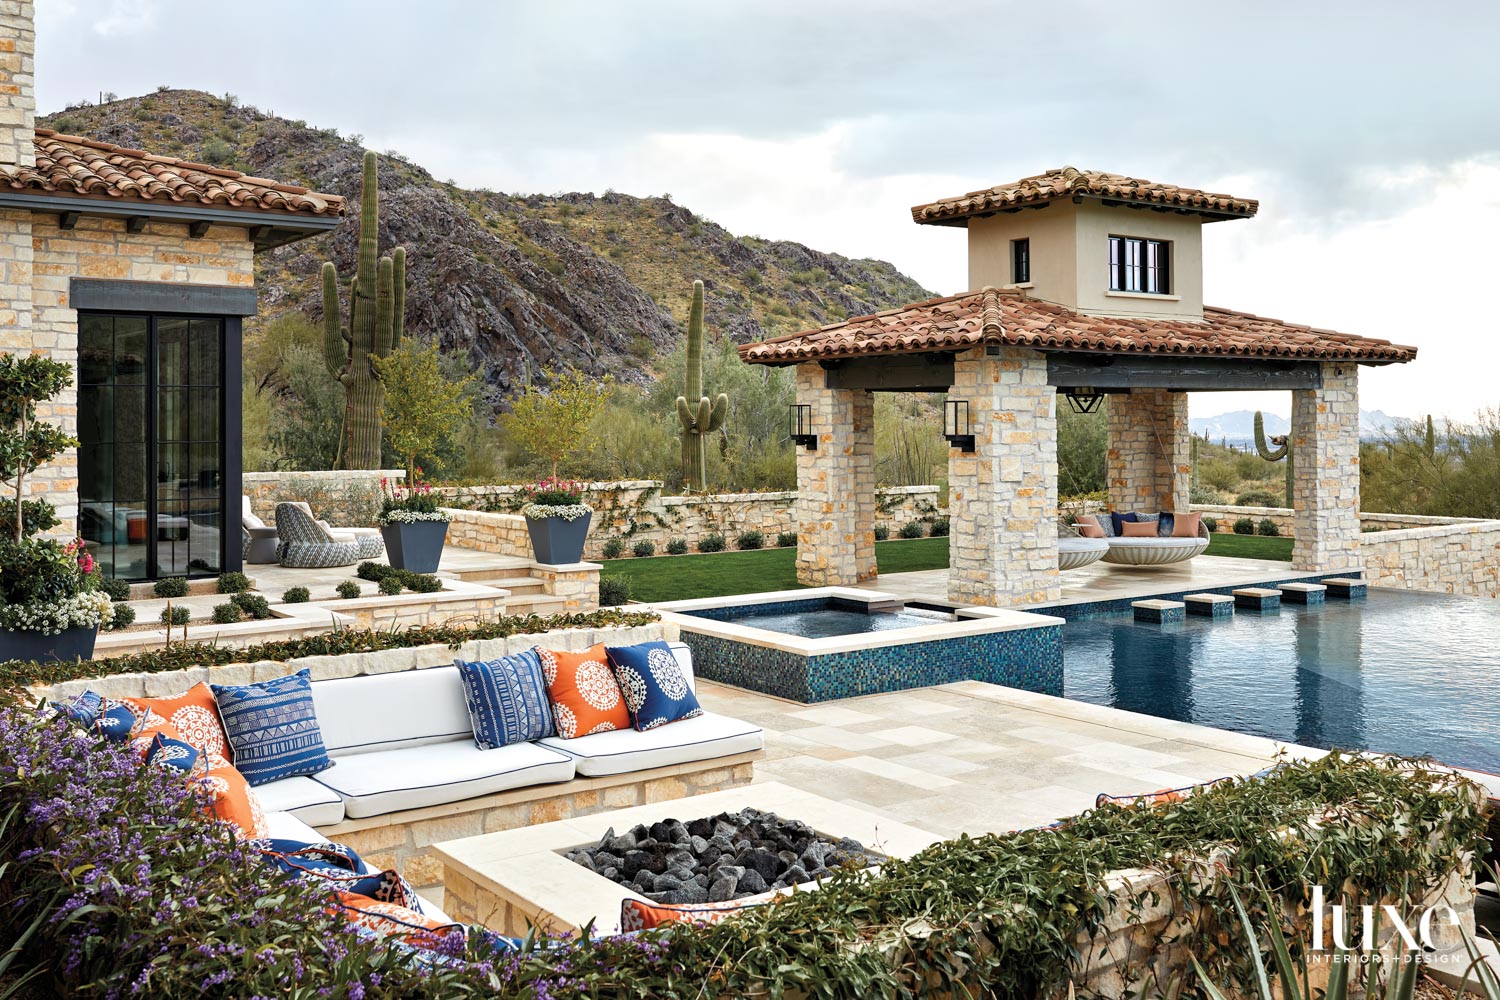 Say ‘Hello’ To Resort-Style Living At This Desert Mediterranean Home